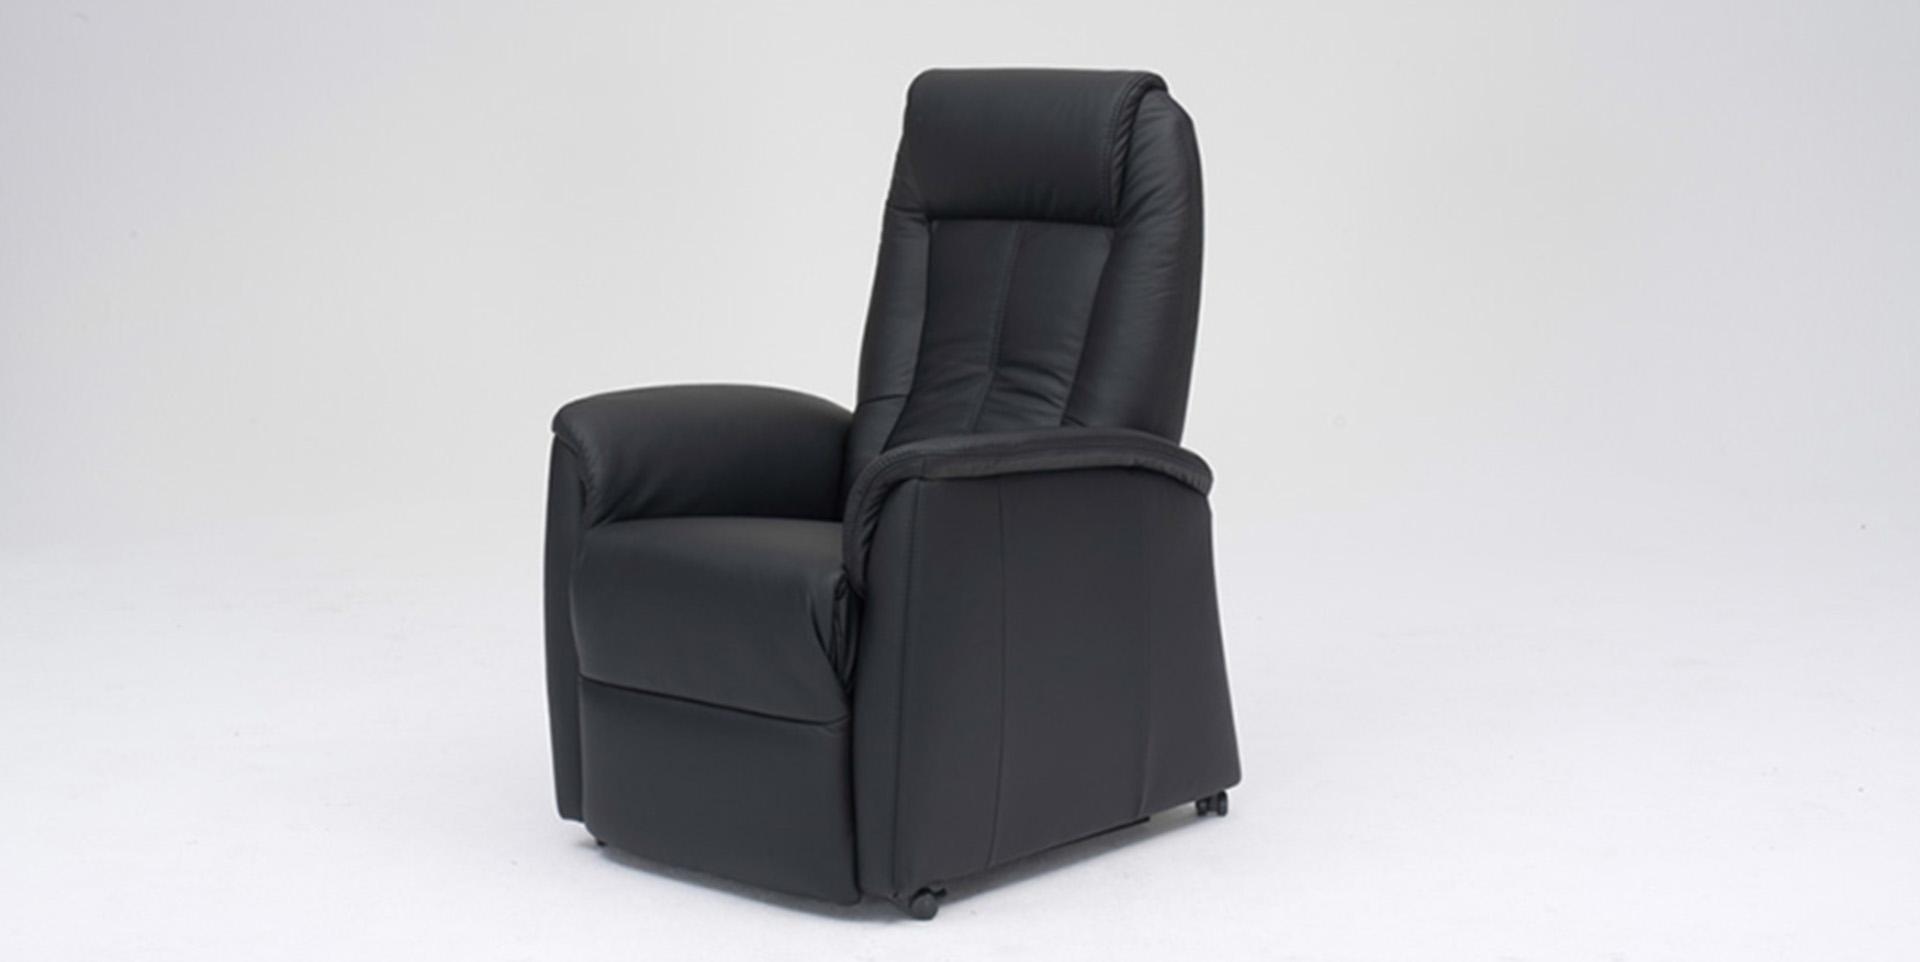 Slider Fauteuil relaxation 9107 (image 2)